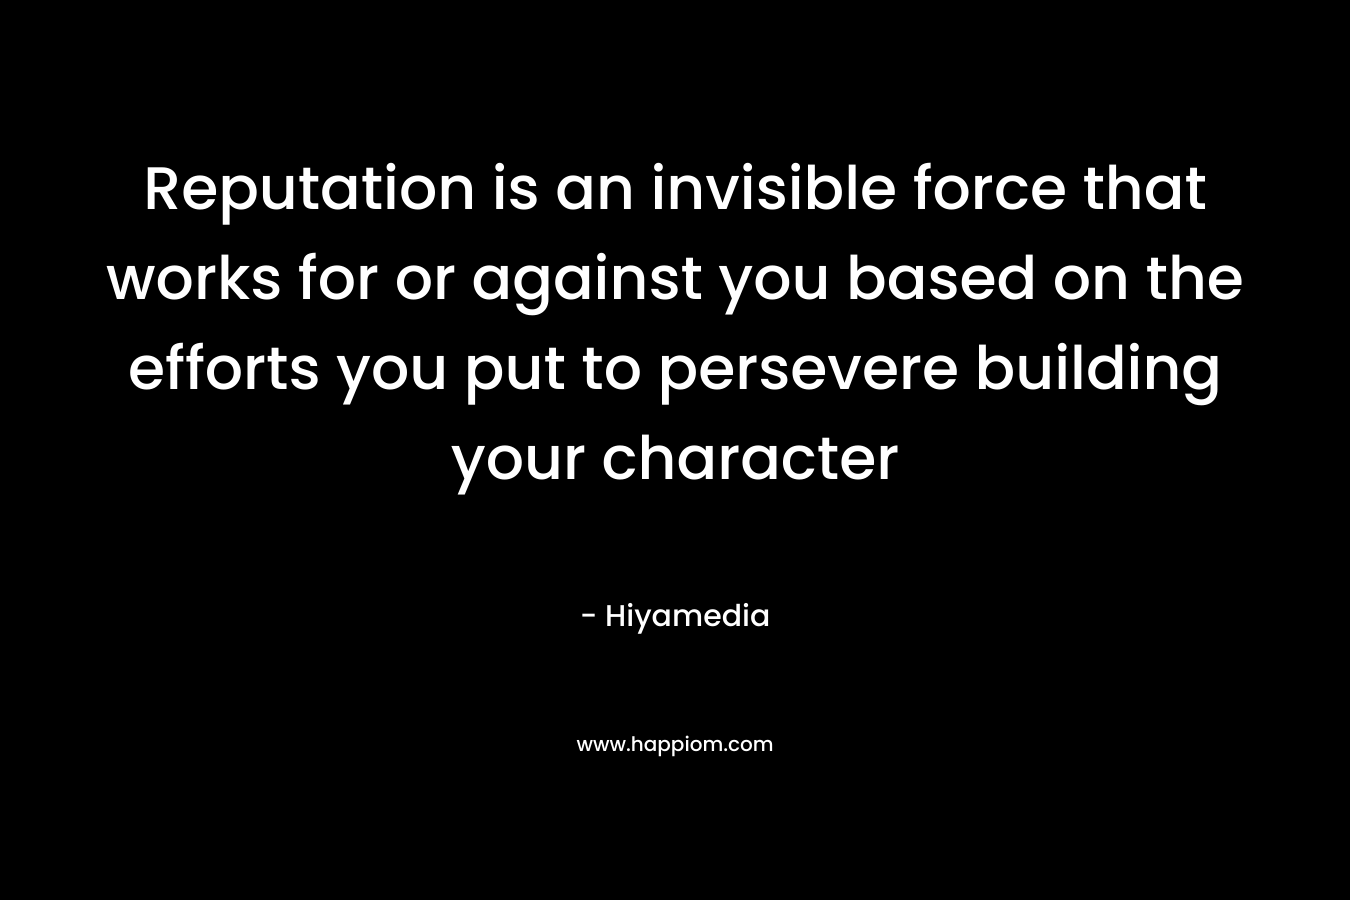 Reputation is an invisible force that works for or against you based on the efforts you put to persevere building your character